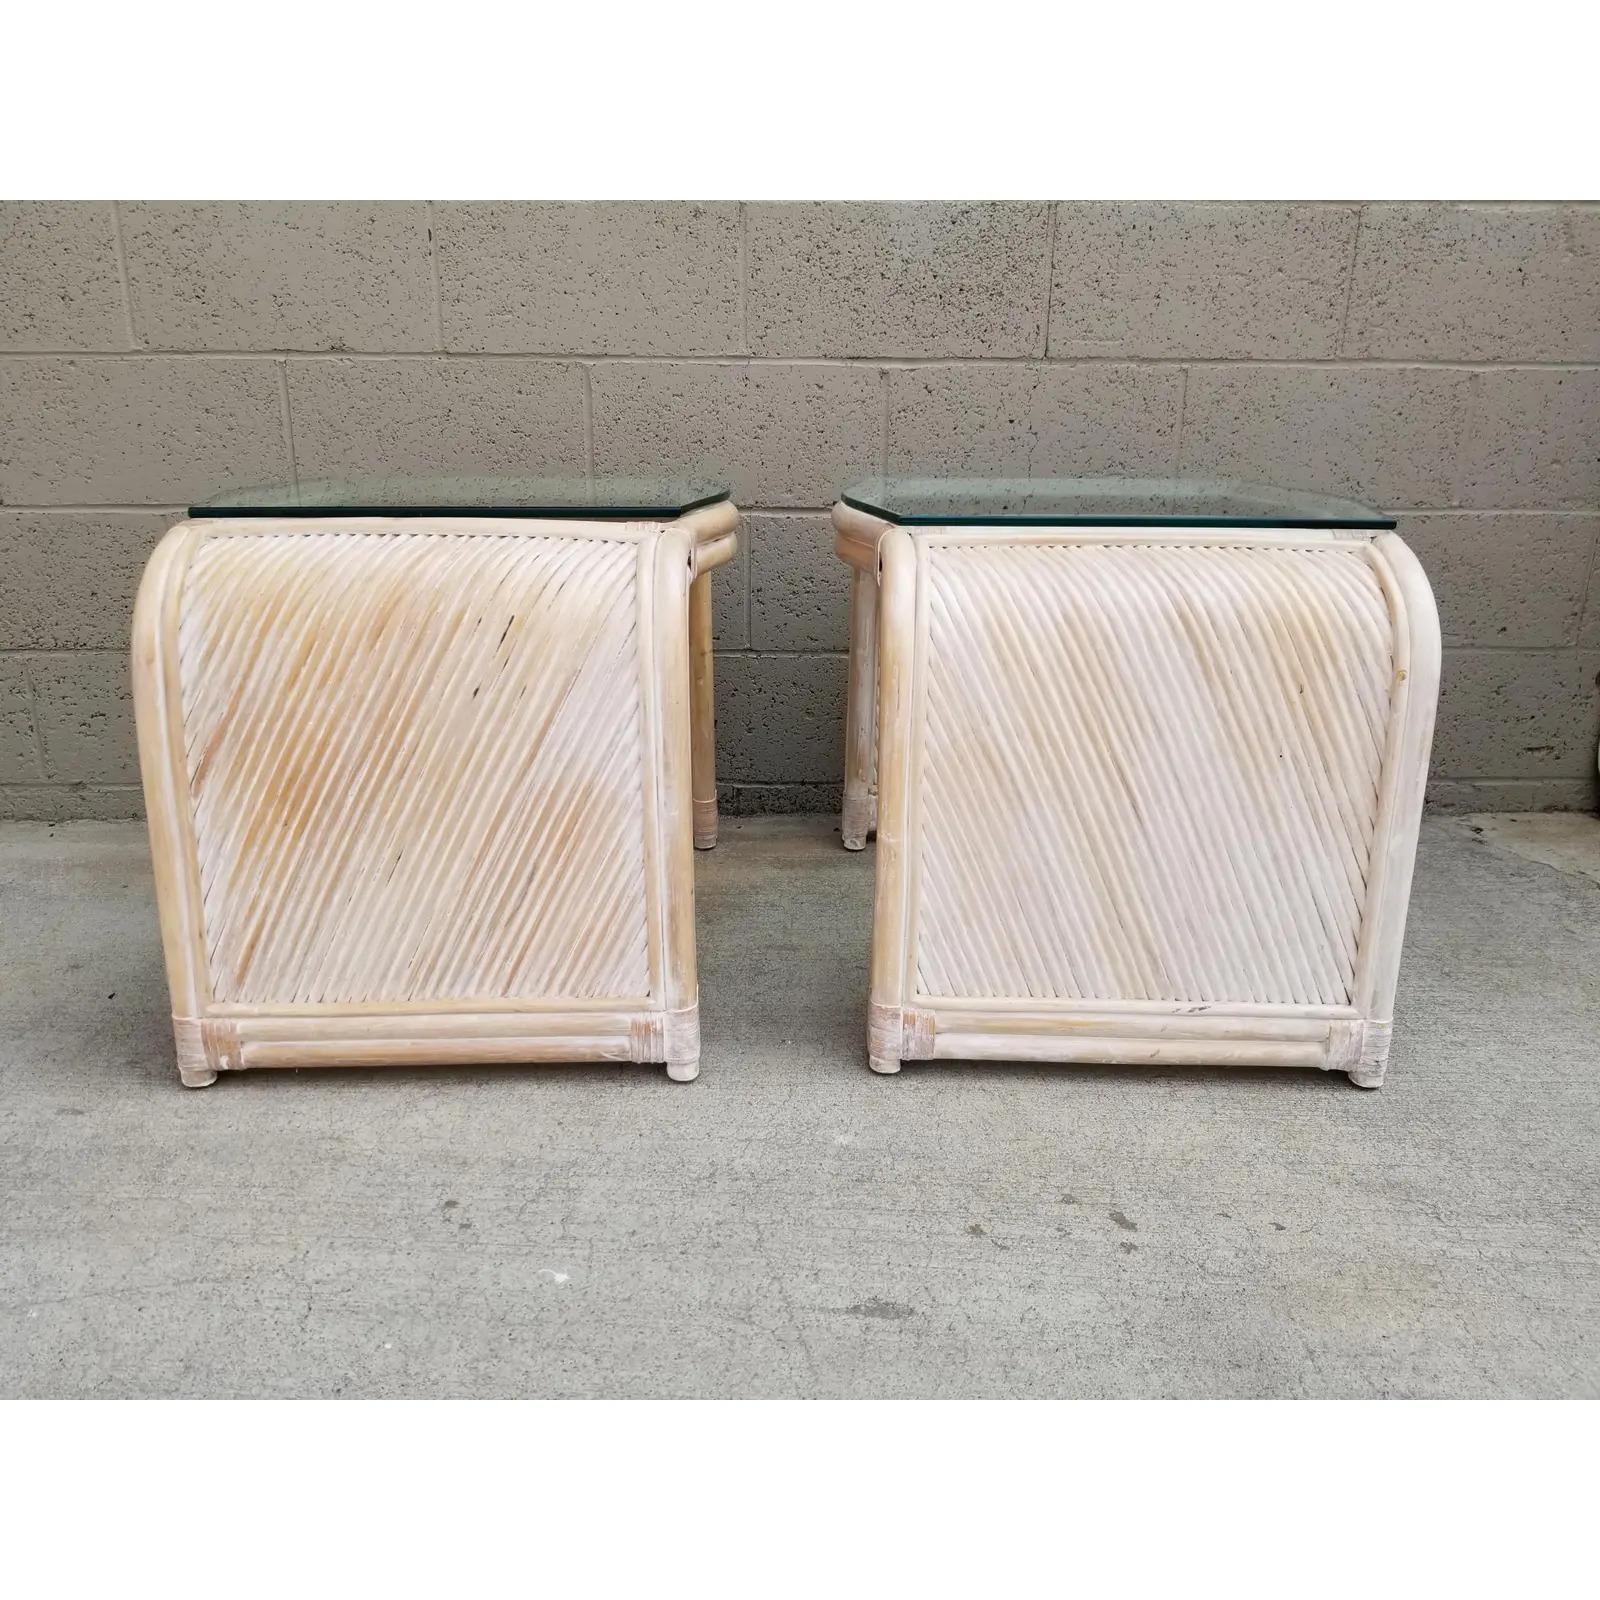 Henry Link split reed and bamboo end tables with glass tops. Bindings are done with leather. Original white-wash finish. Late 20th century. Scratches faint water ring to glass top.

Henry Link:
Henry Talmadge Link (b.1889 d.1983) had been a